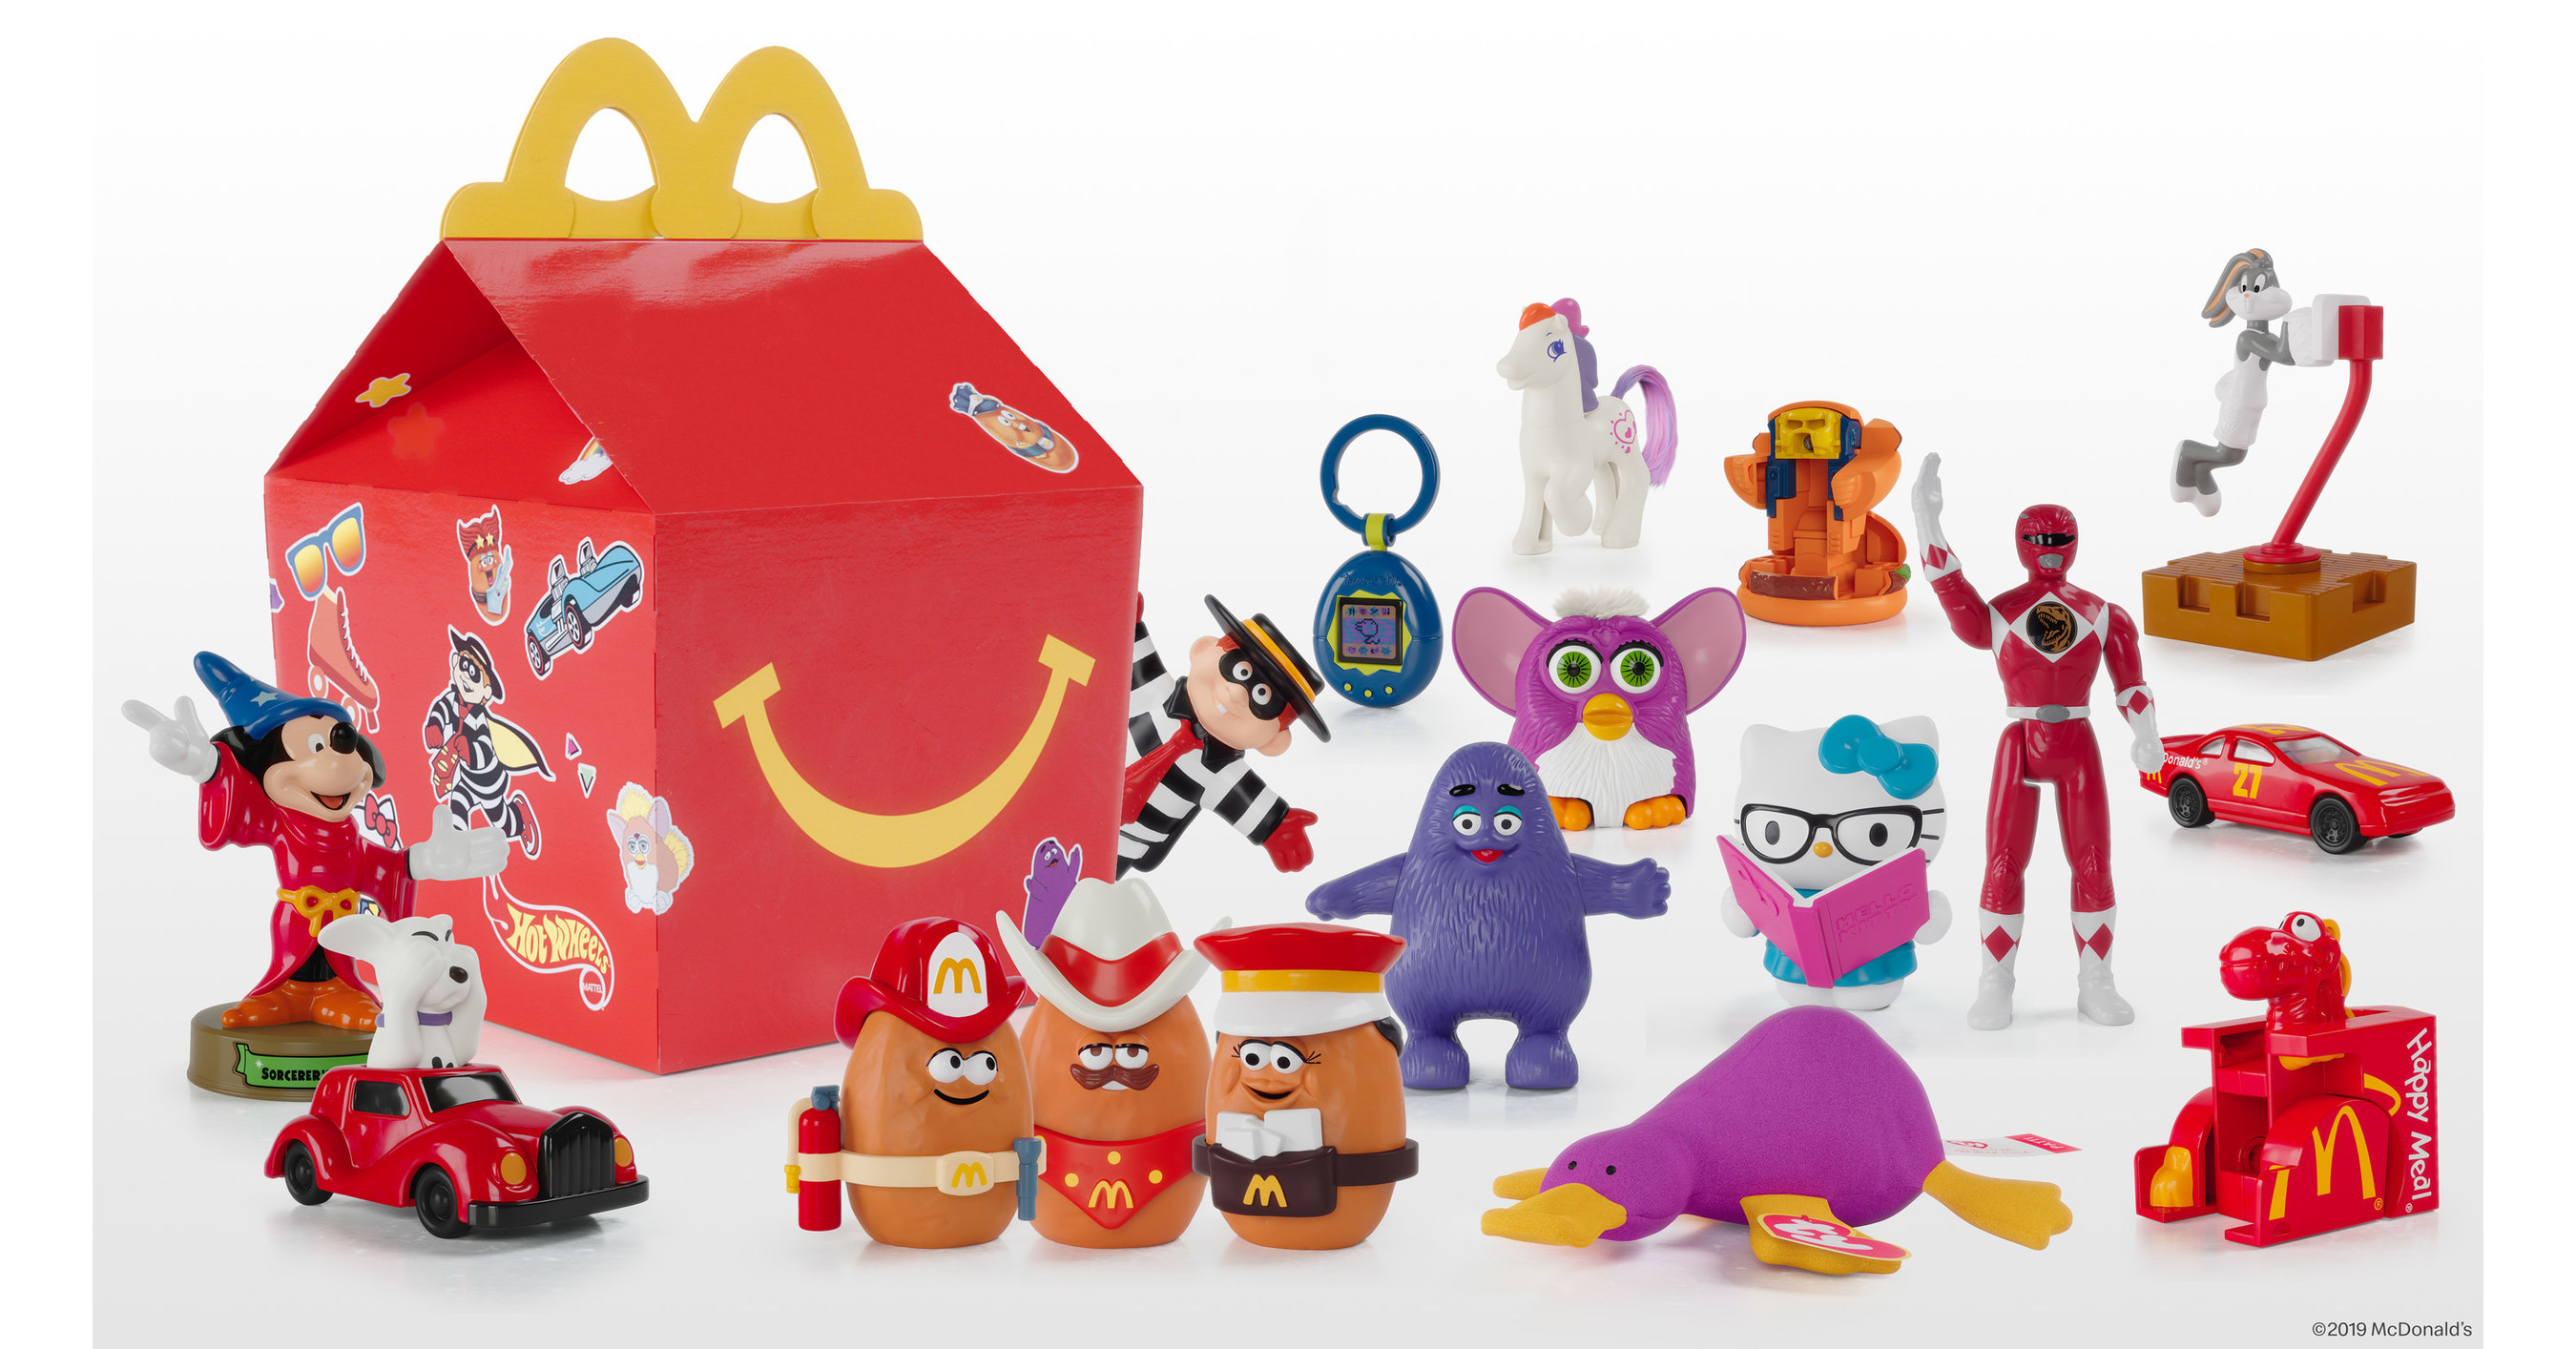 They're Back! McDonald's Introduces the LimitedEdition Surprise Happy